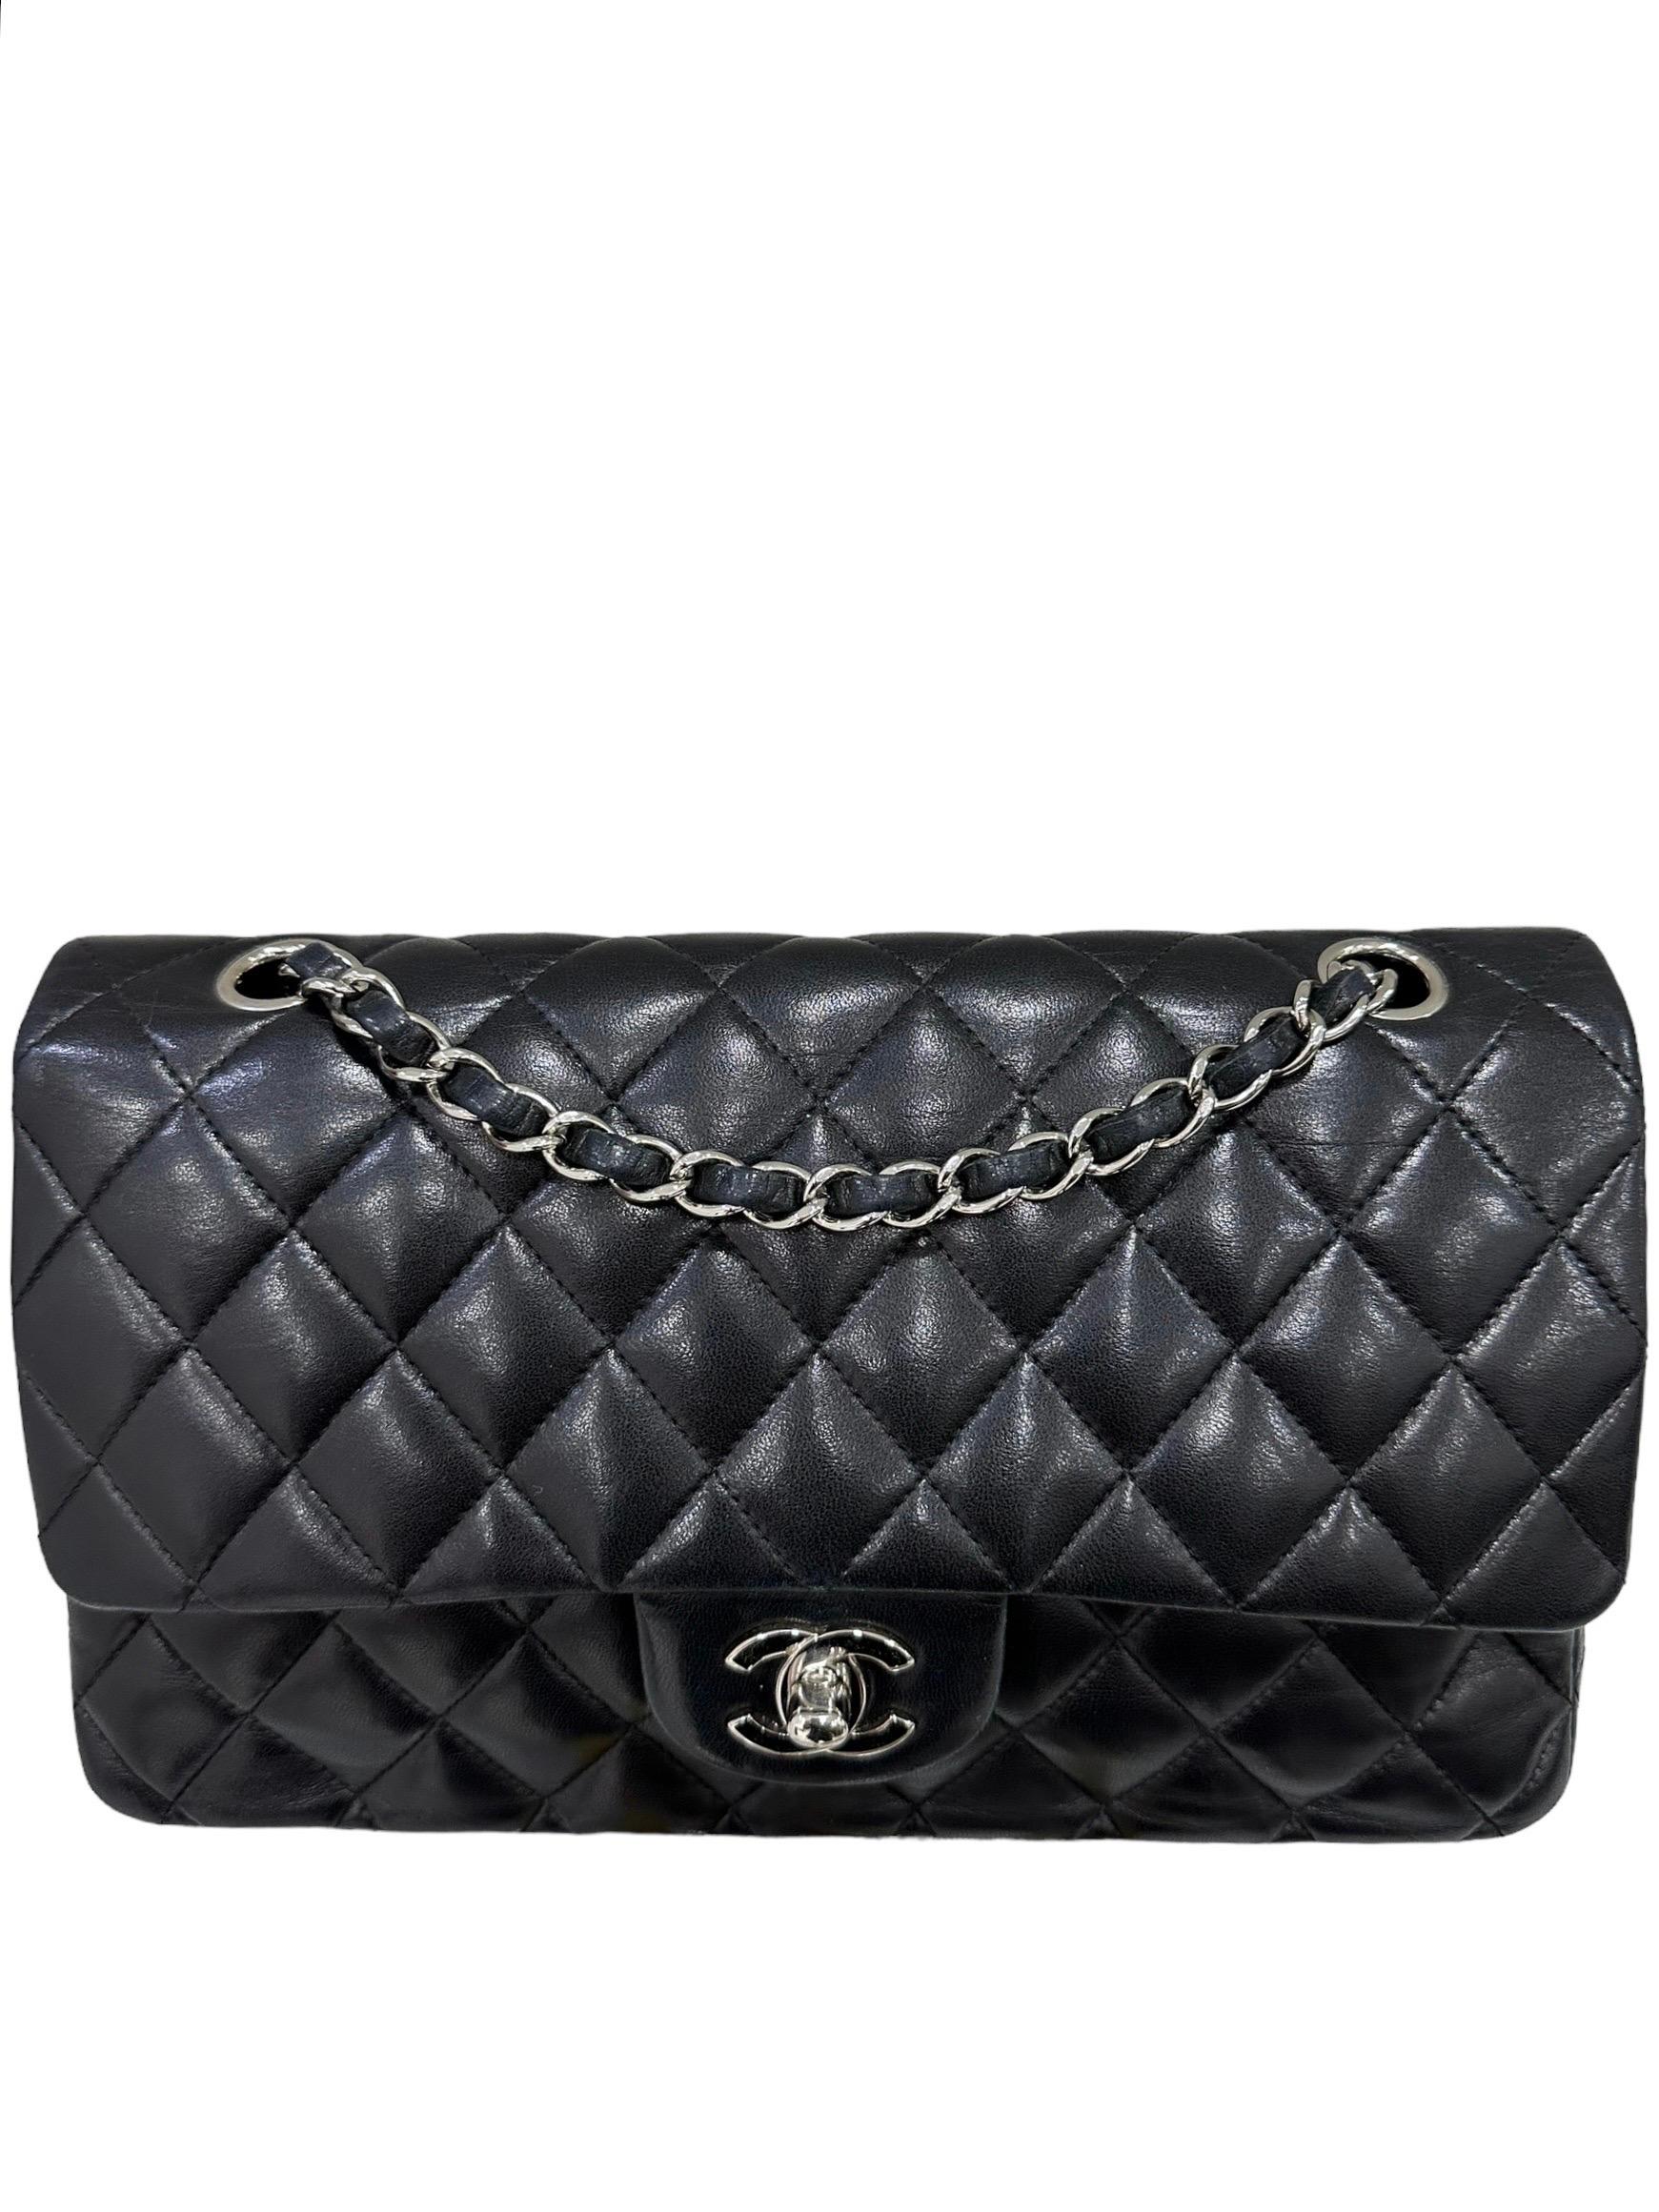 Chanel signed bag, model 2.55, made of black smooth leather with silver hardware. Equipped with a flap with CC twist lock, internally equipped with an additional flap with button closure. Equipped with a braided leather and chain shoulder strap, to